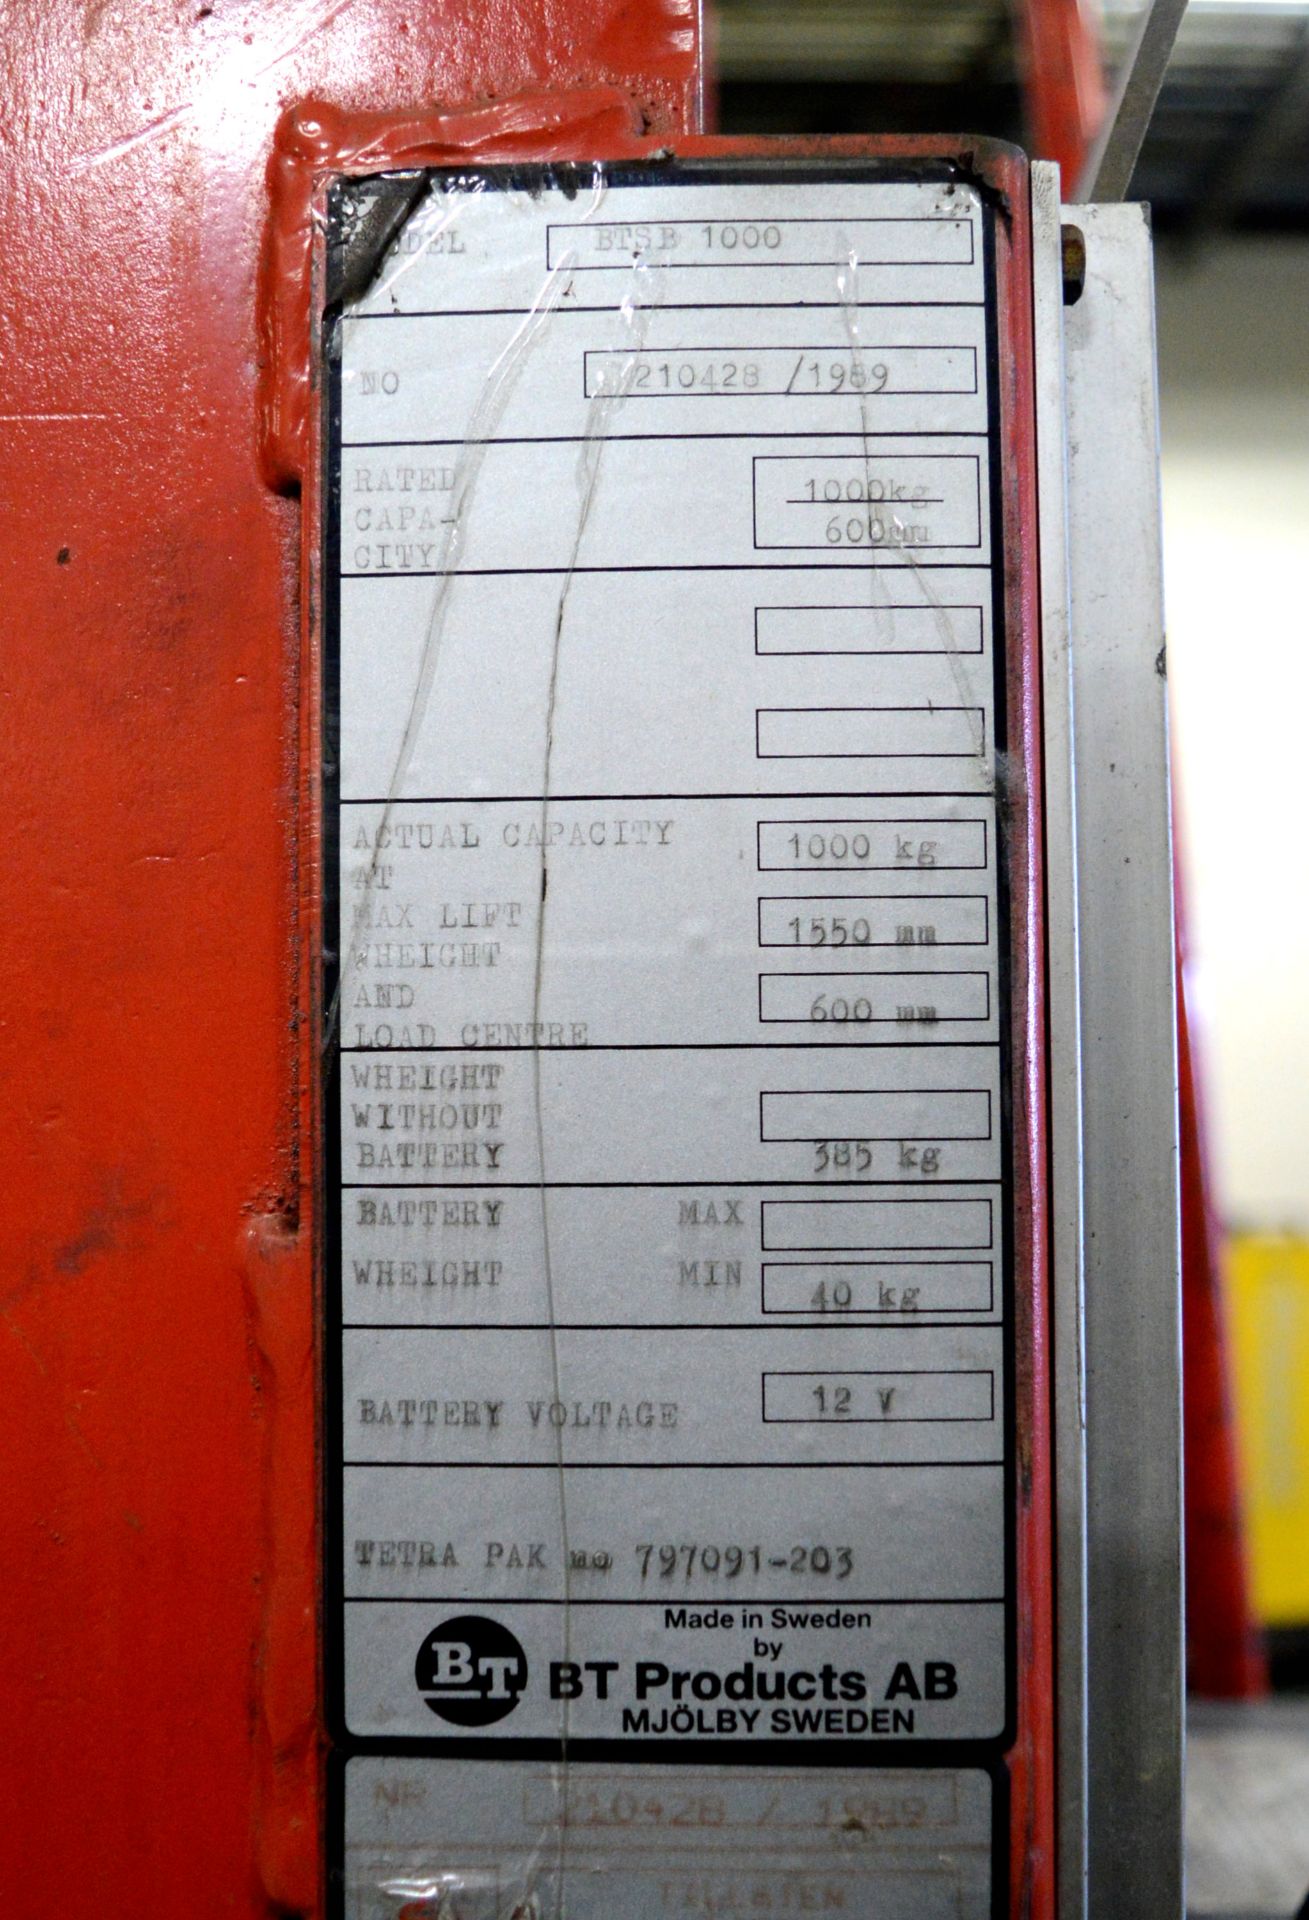 BT BTSE 1000 Forklift & Charger - 1000kg Capacity, 1550mm Lifting Height. - Image 3 of 5